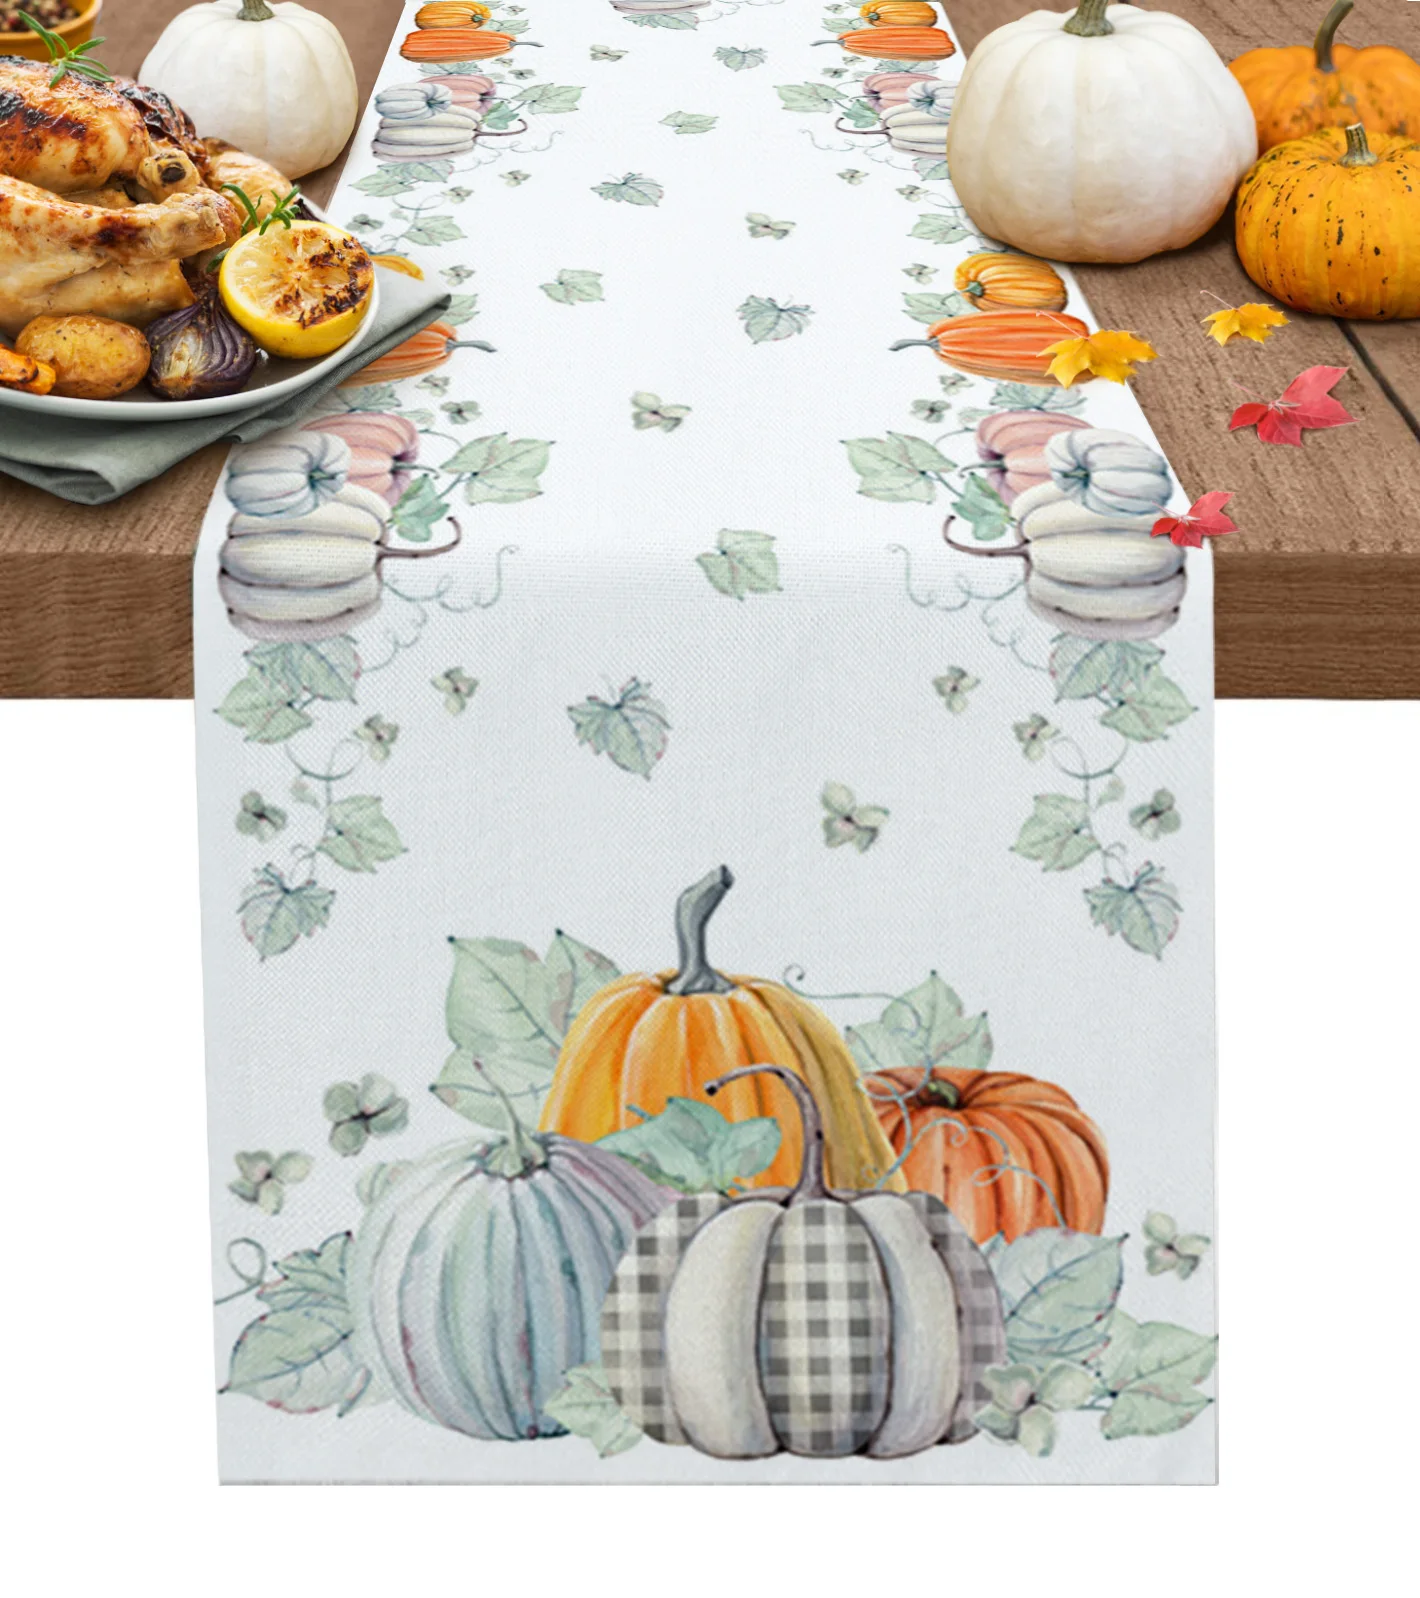 

Thanksgiving Fall Pumpkin Maple Leaf White Table Runner Kitchen Dining Table Decor Tablecloth Wedding Holiday Decor Table Runner